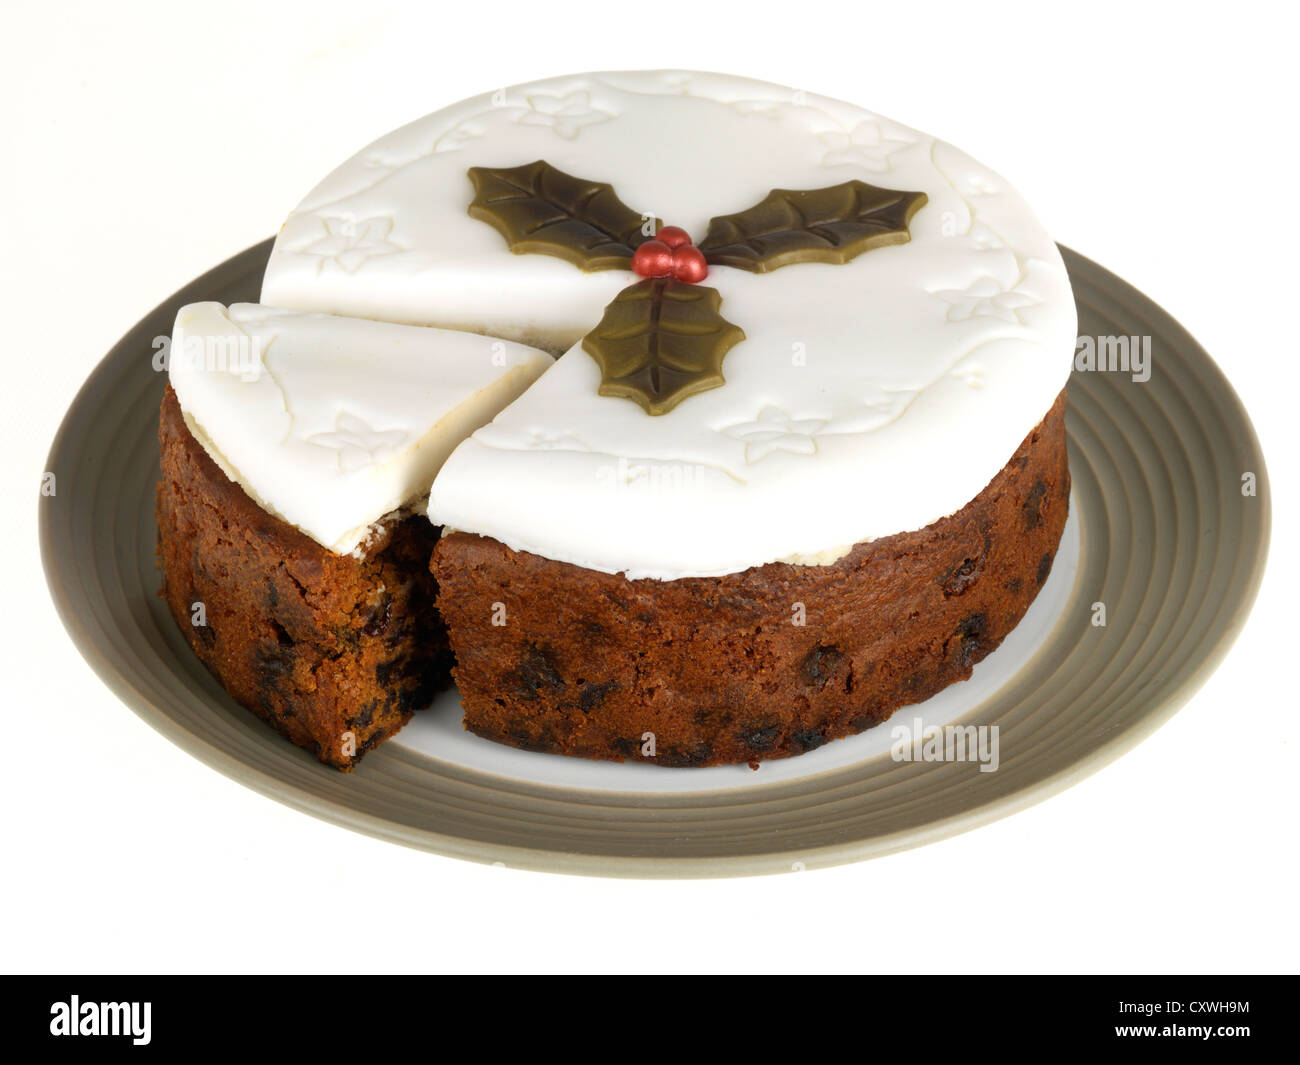 Rich Traditional Festive Christmas Fruit Cake With White Icing, Decorated With Holly Leaves, No People Isolated Against A White Background Stock Photo